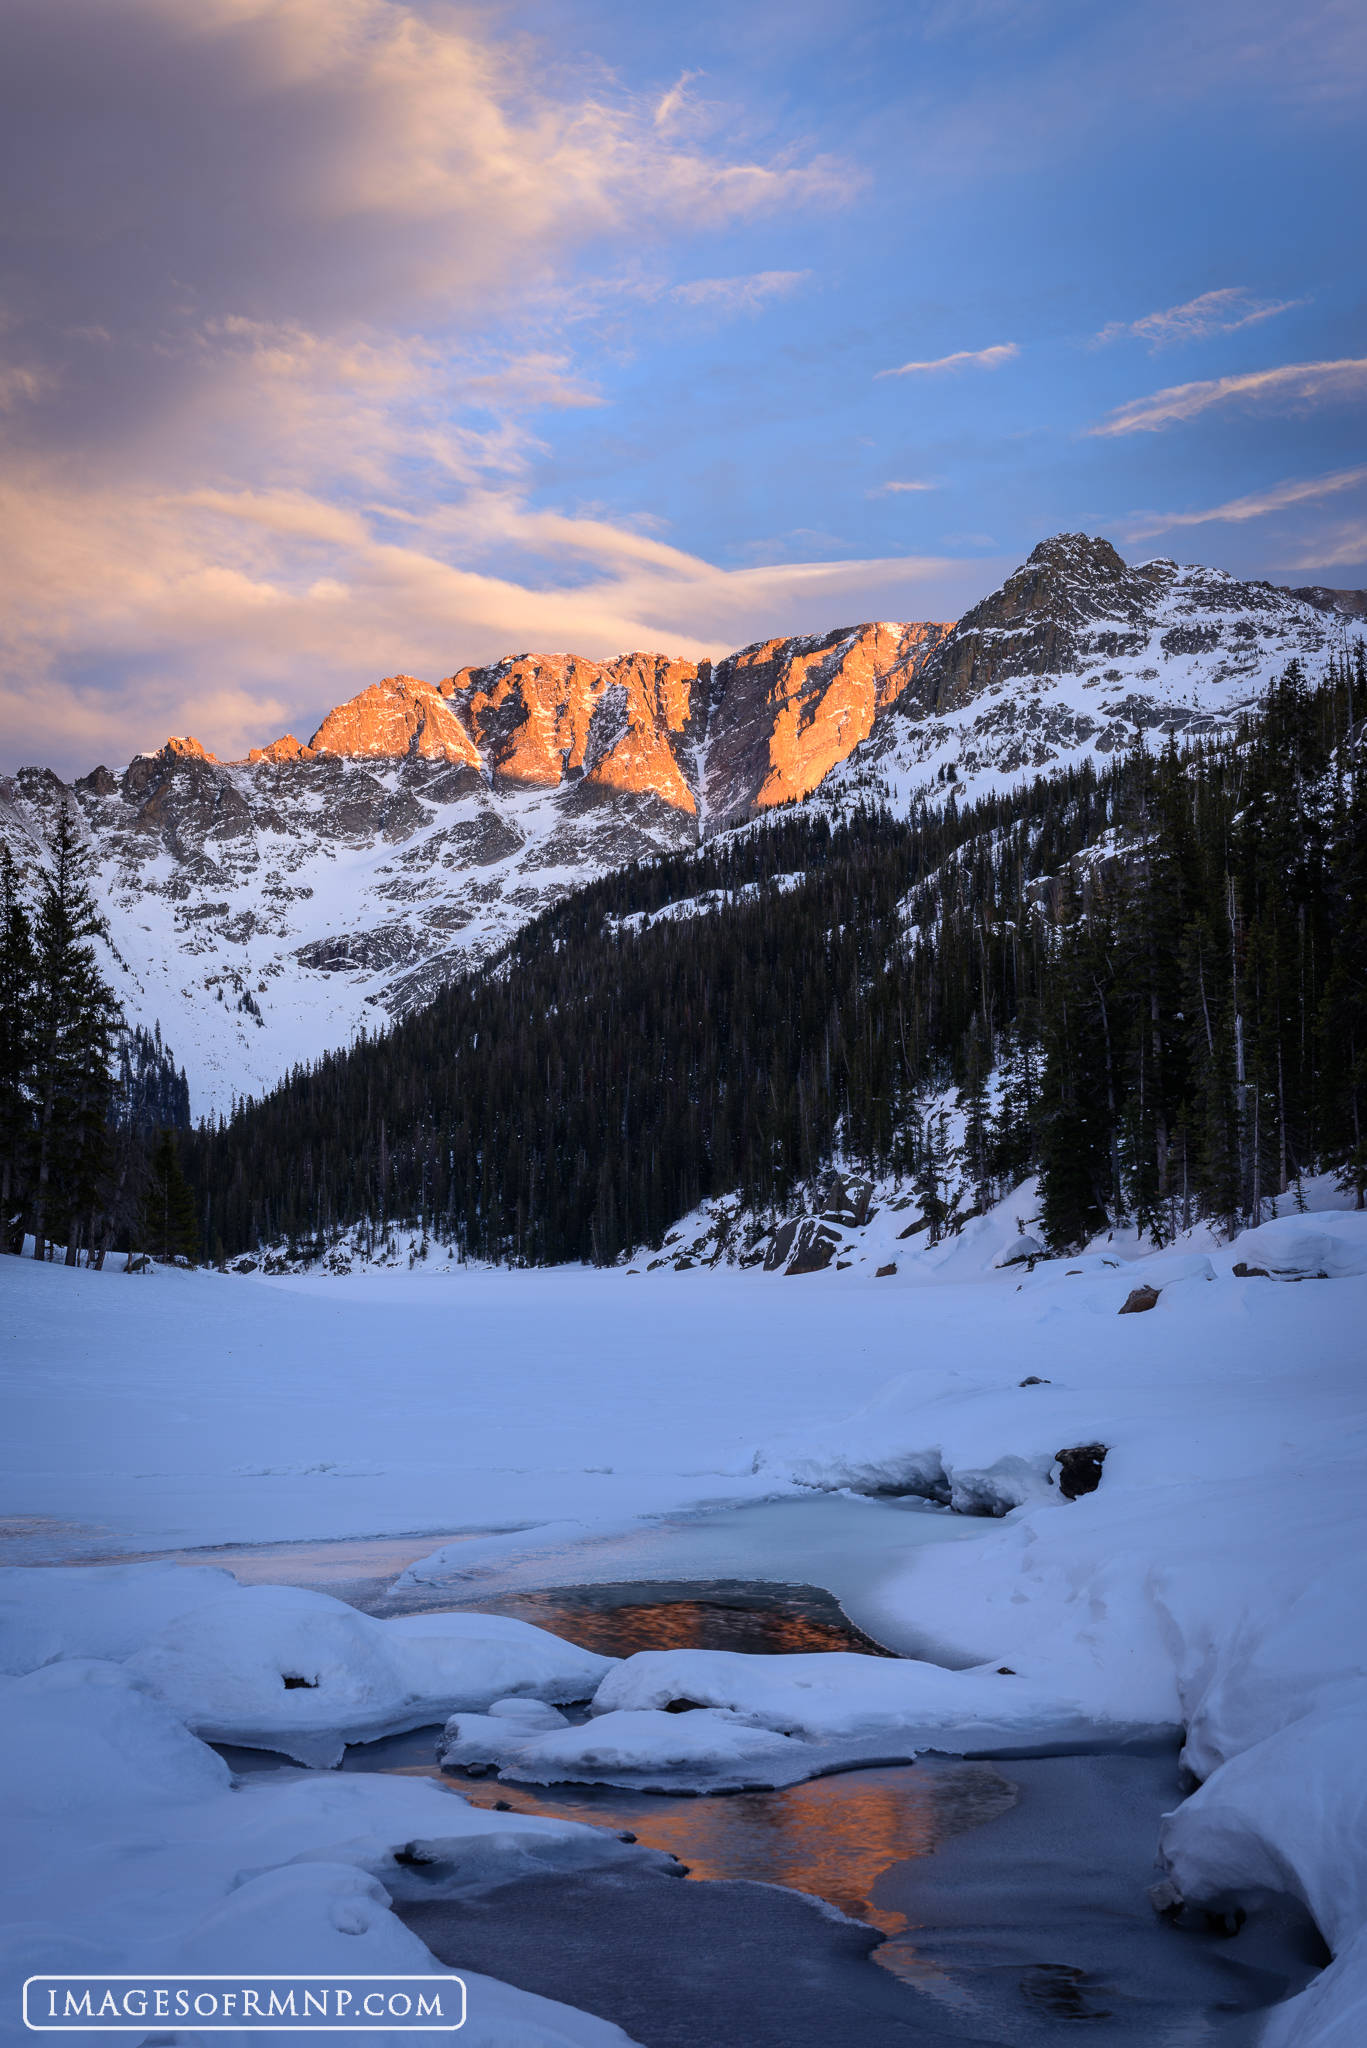 For more information on this image and for purchasing options,please call the Image of RMNP gallery at 970-586-4352.